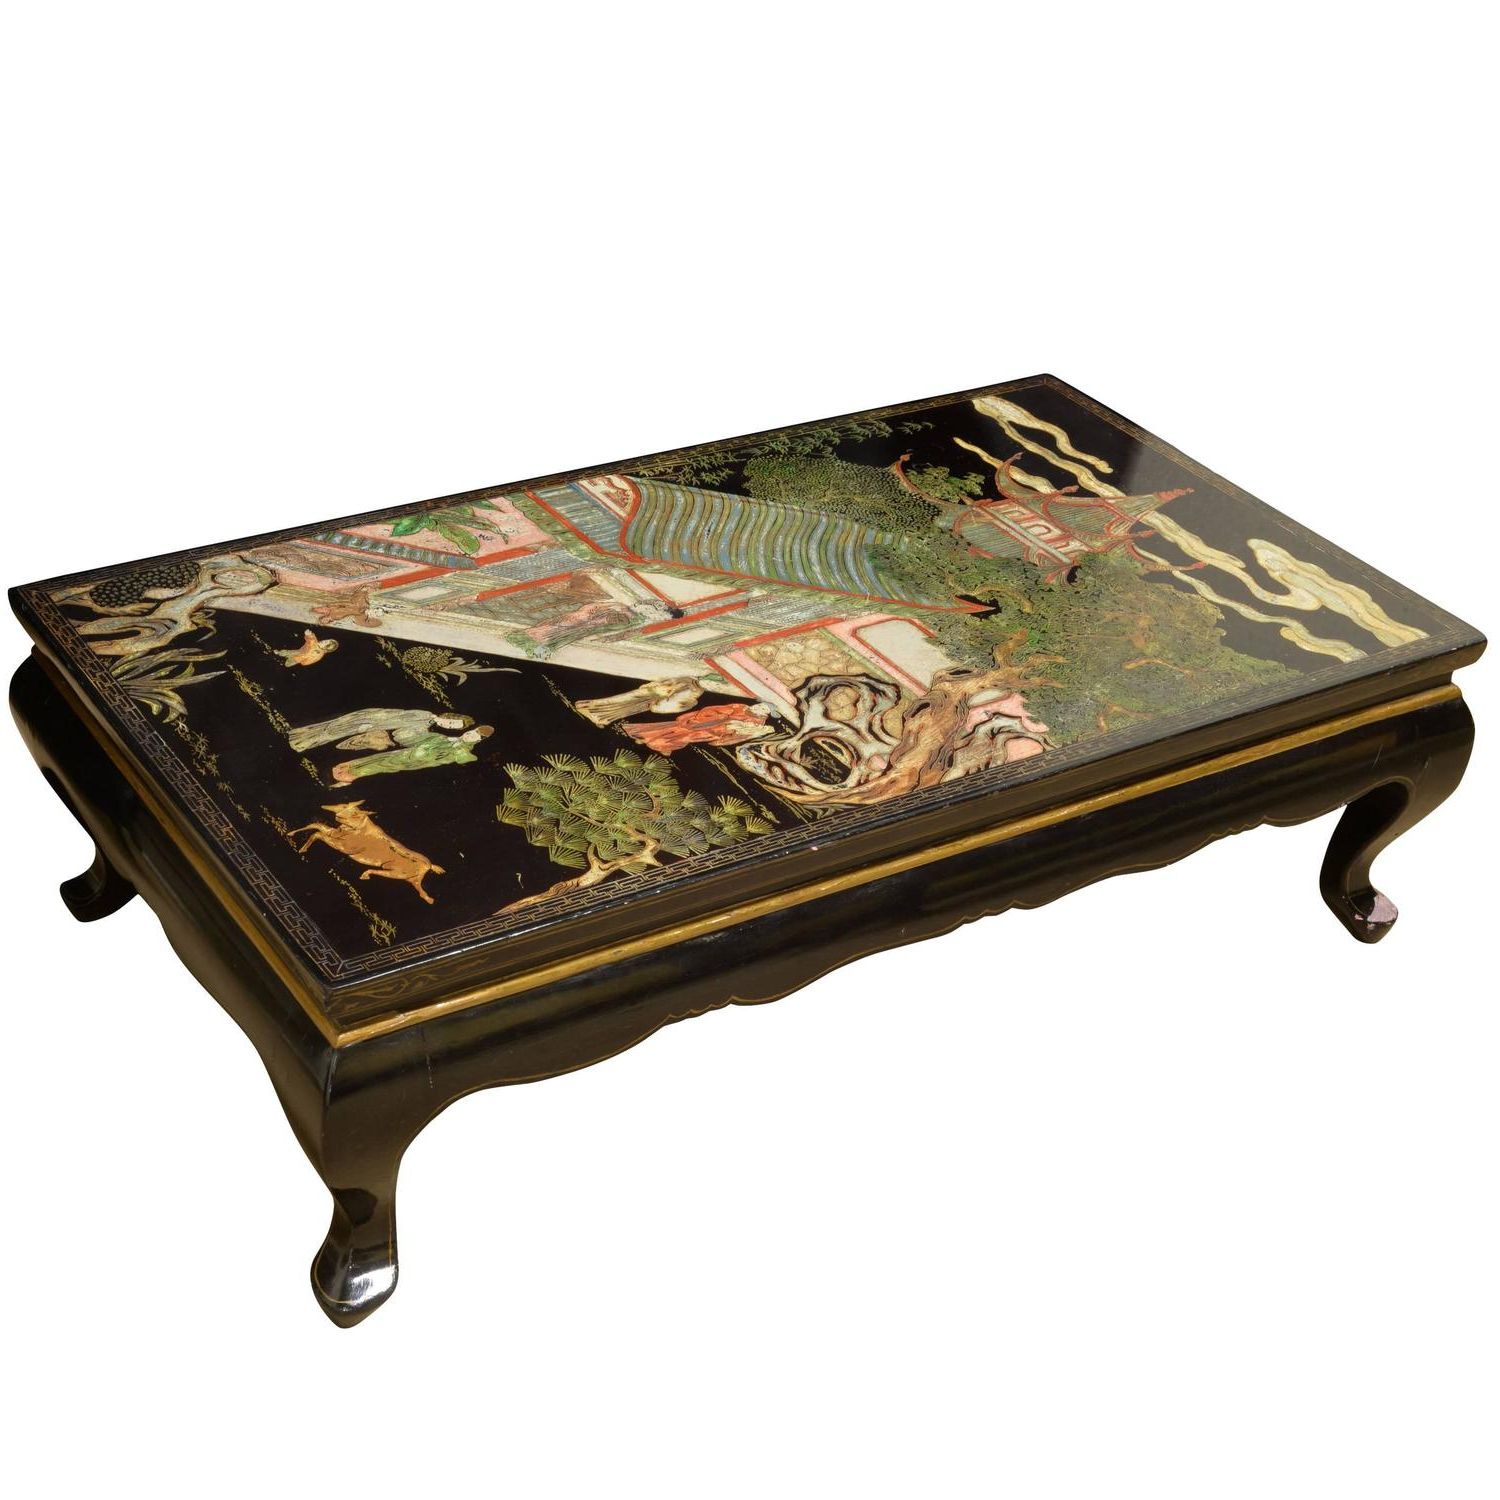 Fashionable Antique White Black Coffee Tables With Regard To Oriental Black Lacquer Coffee Table At 1stdibs (View 8 of 20)